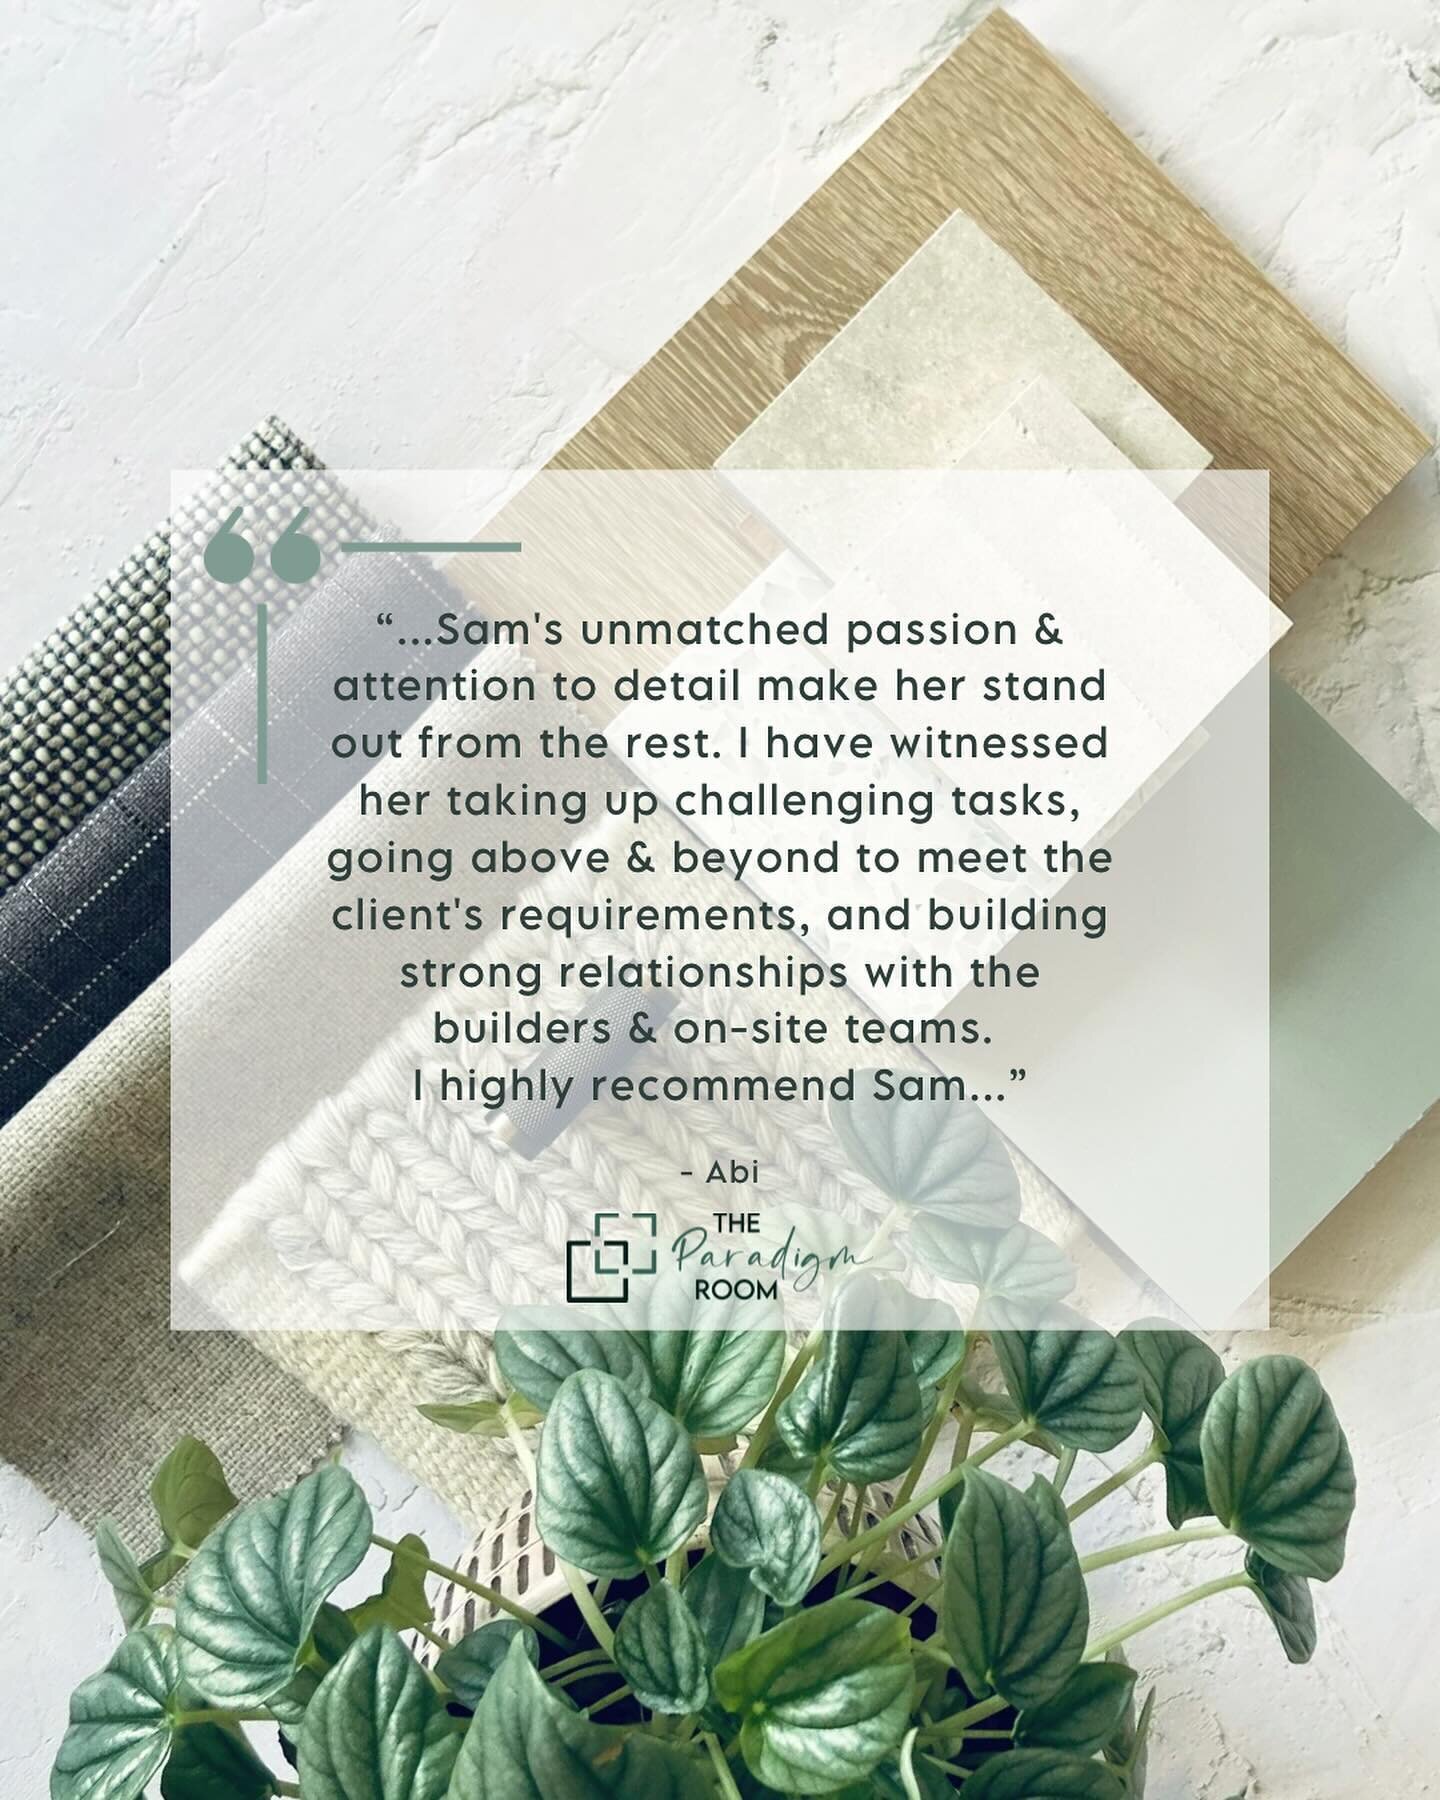 Testimonial | Part 2 of the beautiful words from Abi, who I&rsquo;ve had the pleasure to work with on multiple projects over the years✨

Swipe across for a repost of Part 1 🤍
.
.
.
.
.⁣
#testimonial #certifiedpassivehousedesigner #renovation #reno #